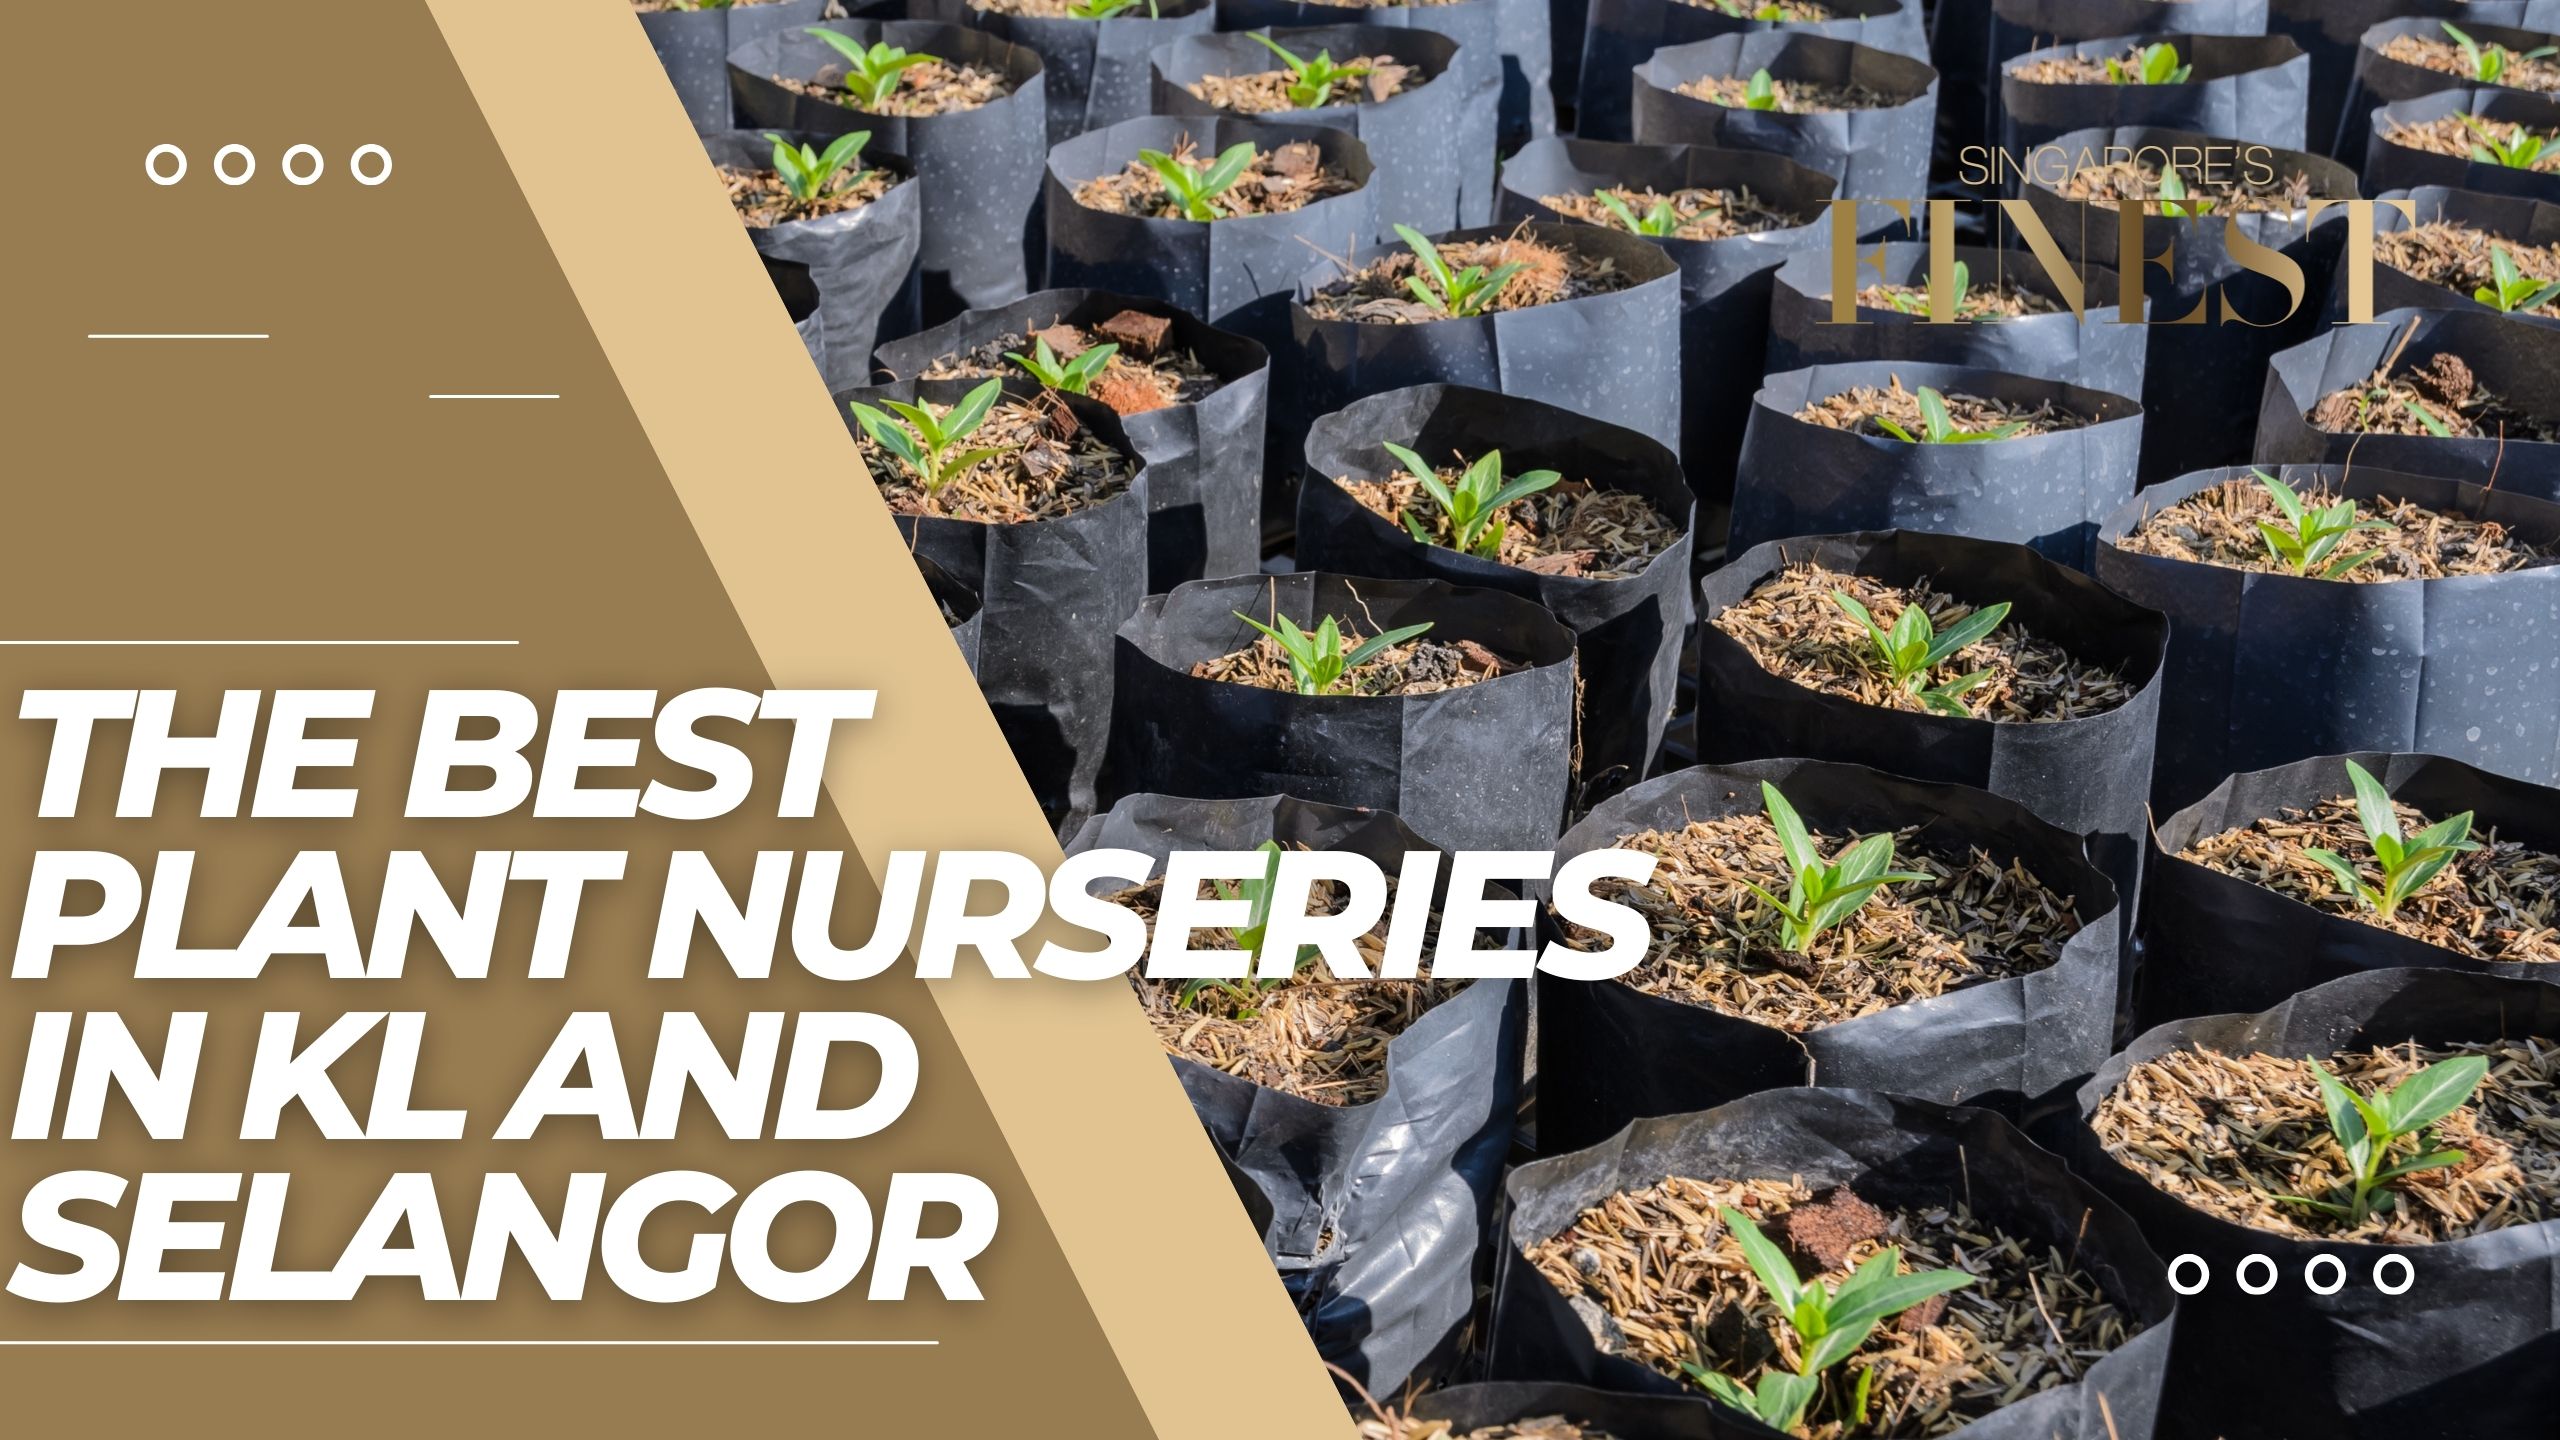 The Finest Plant Nurseries in KL and Selangor